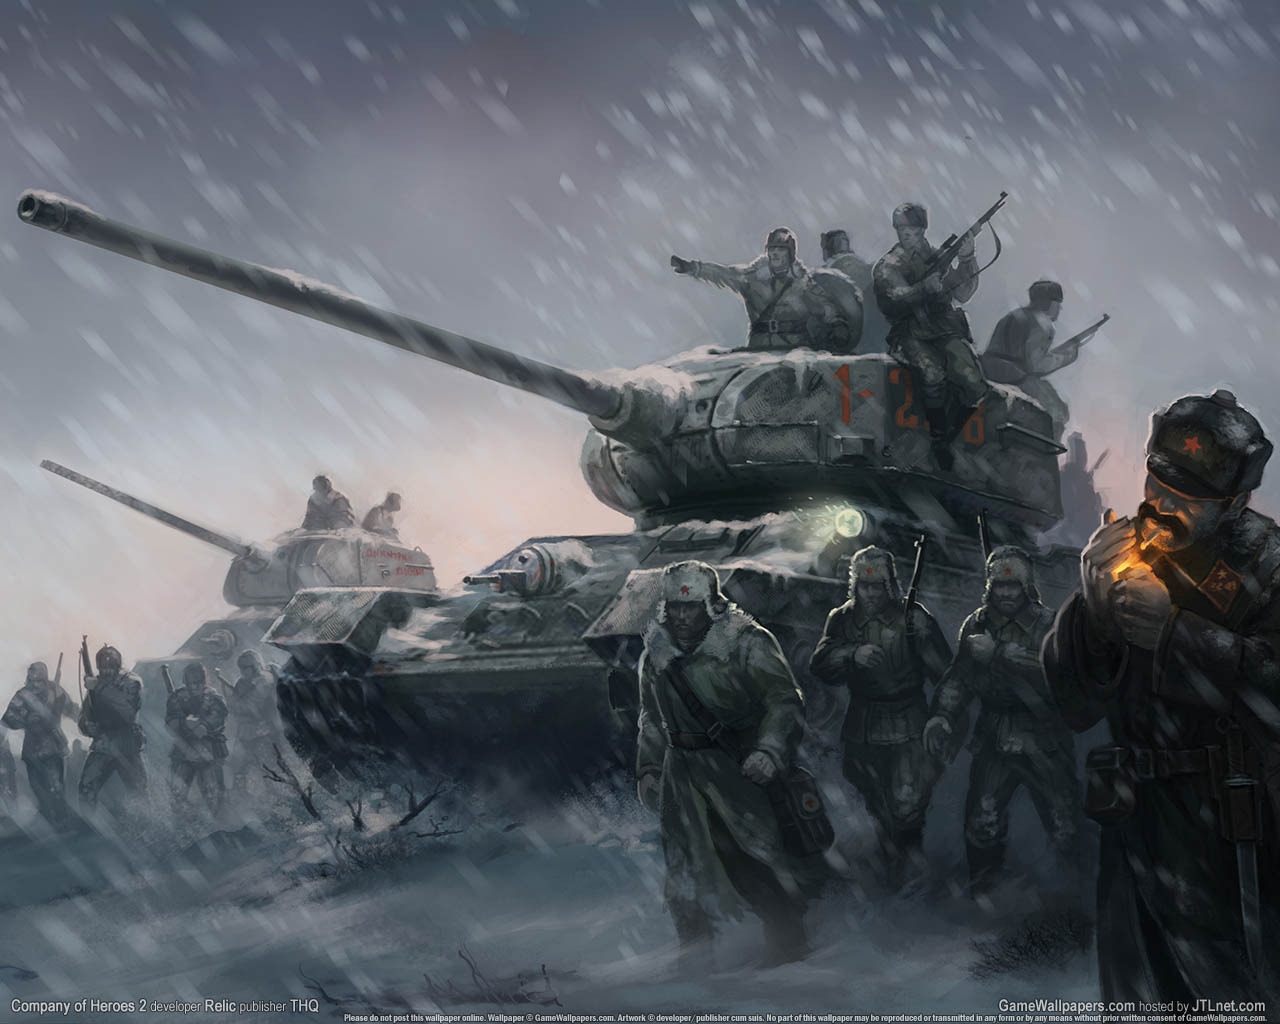 Company of Heroes 2 for 1280 x 1024 resolution